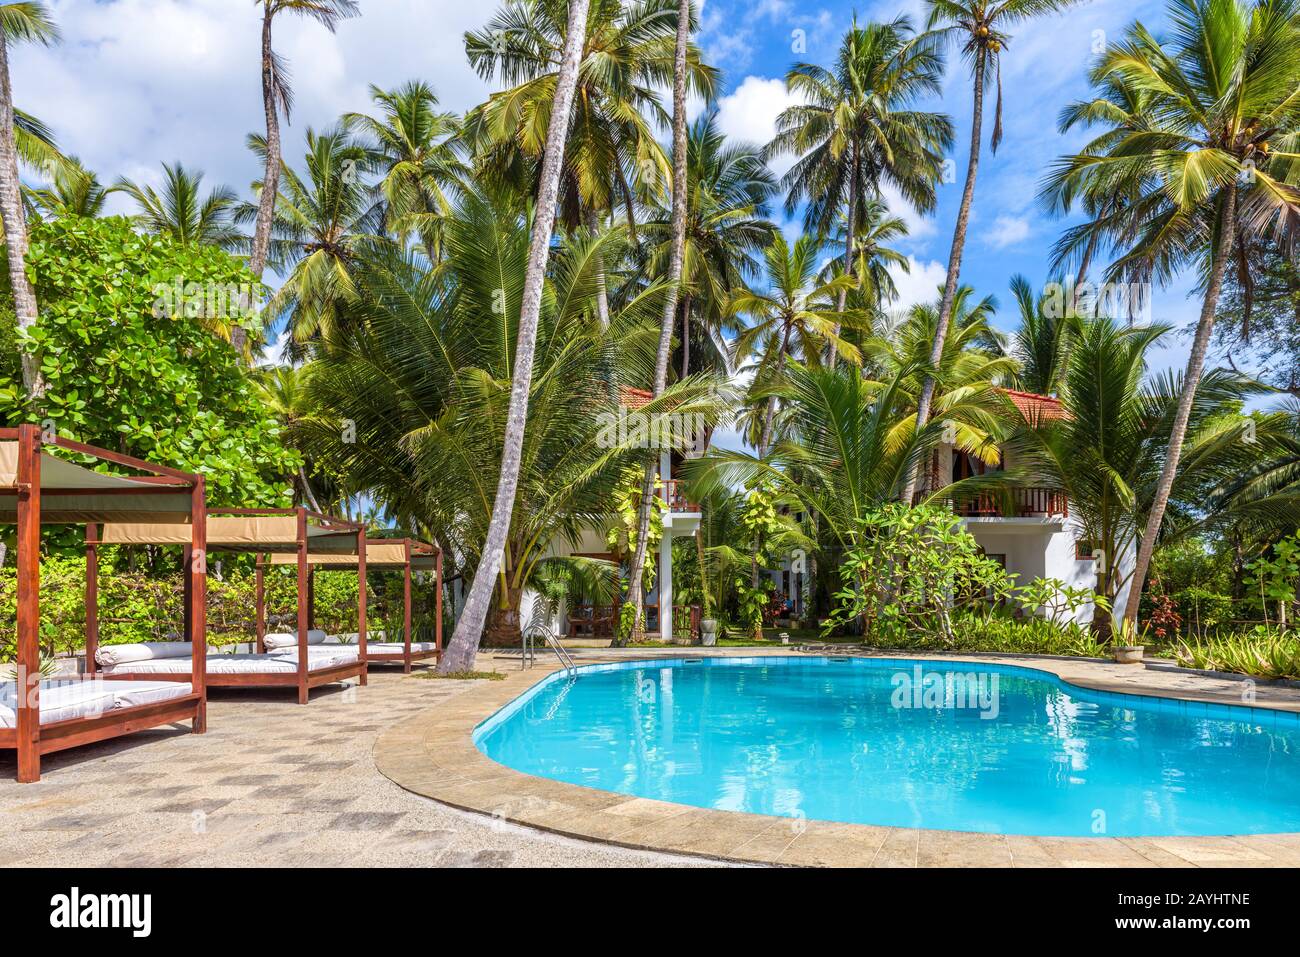 Tangalle, Sri Lanka - Nov 4, 2017: Swimming pool and beach beds in a tropical hotel. Panorama of the pool with blue water in tropics. Idyllic resort a Stock Photo